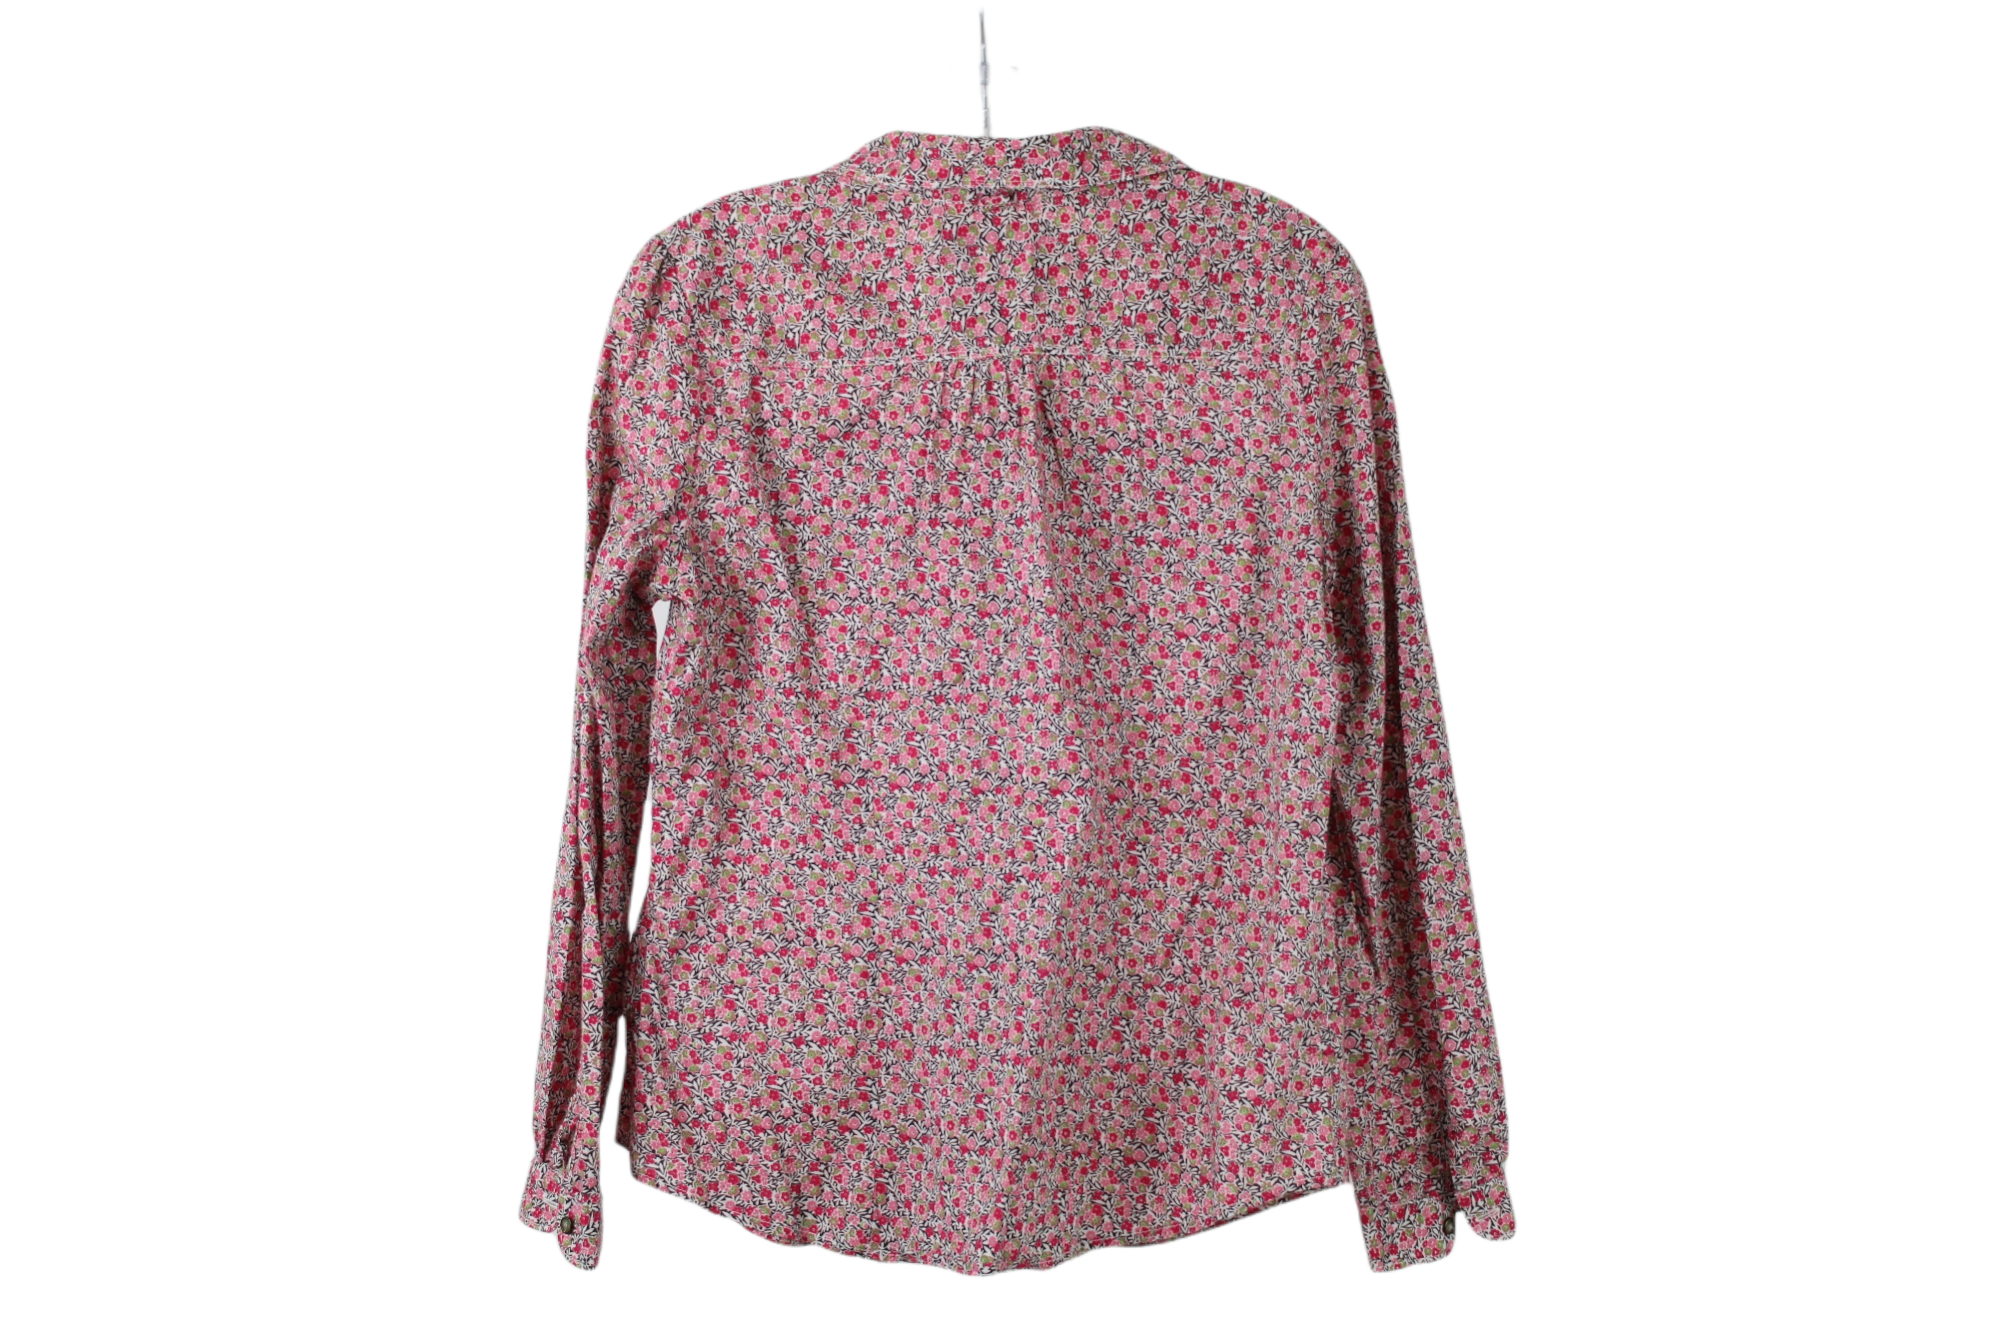 Dockers Pink Floral Button Down Shirt | M